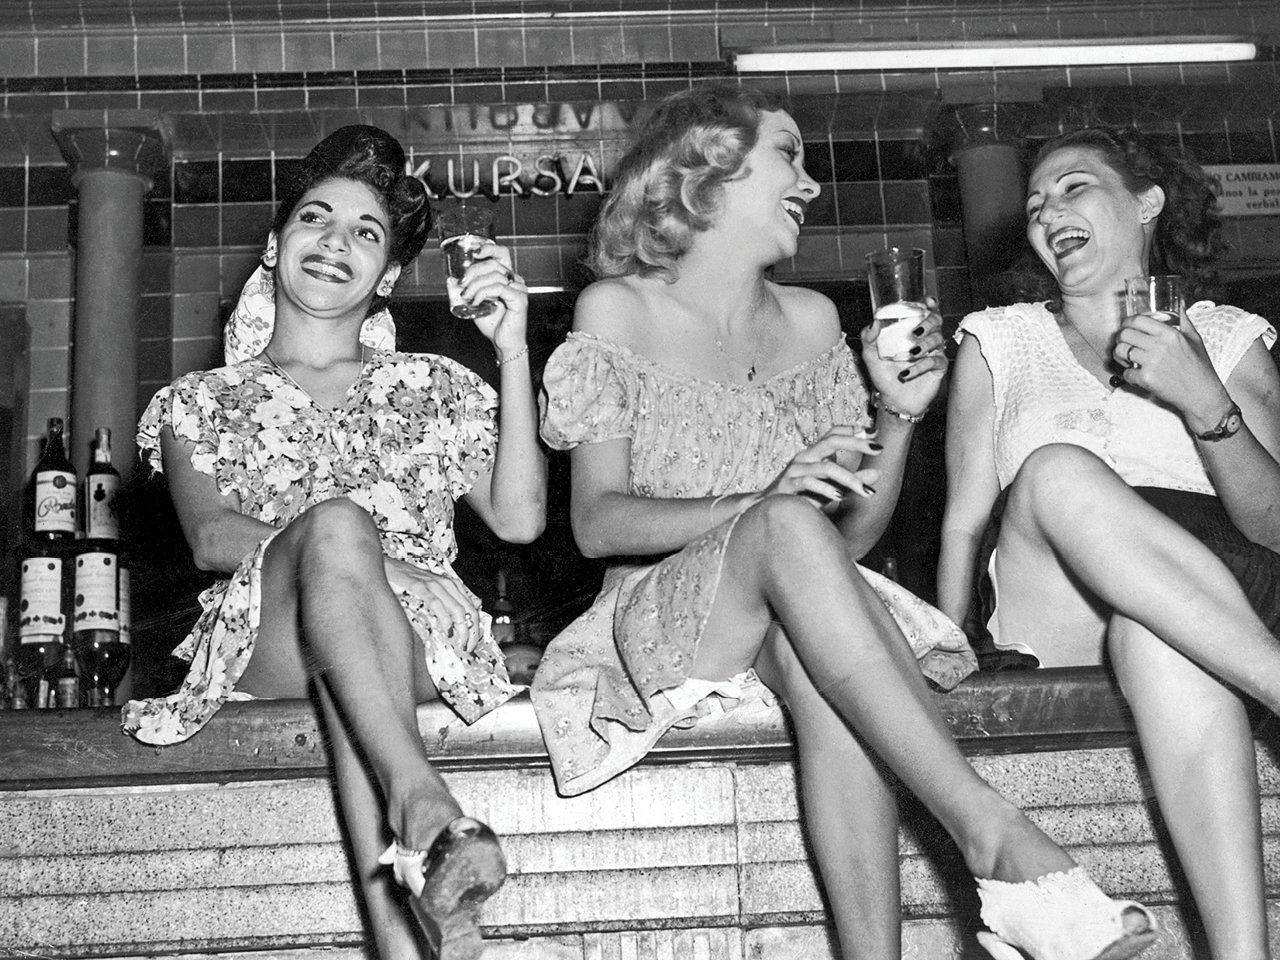 A black and white photo of three young women in dresses, sitting on a bar, holding cocktails and having a great time